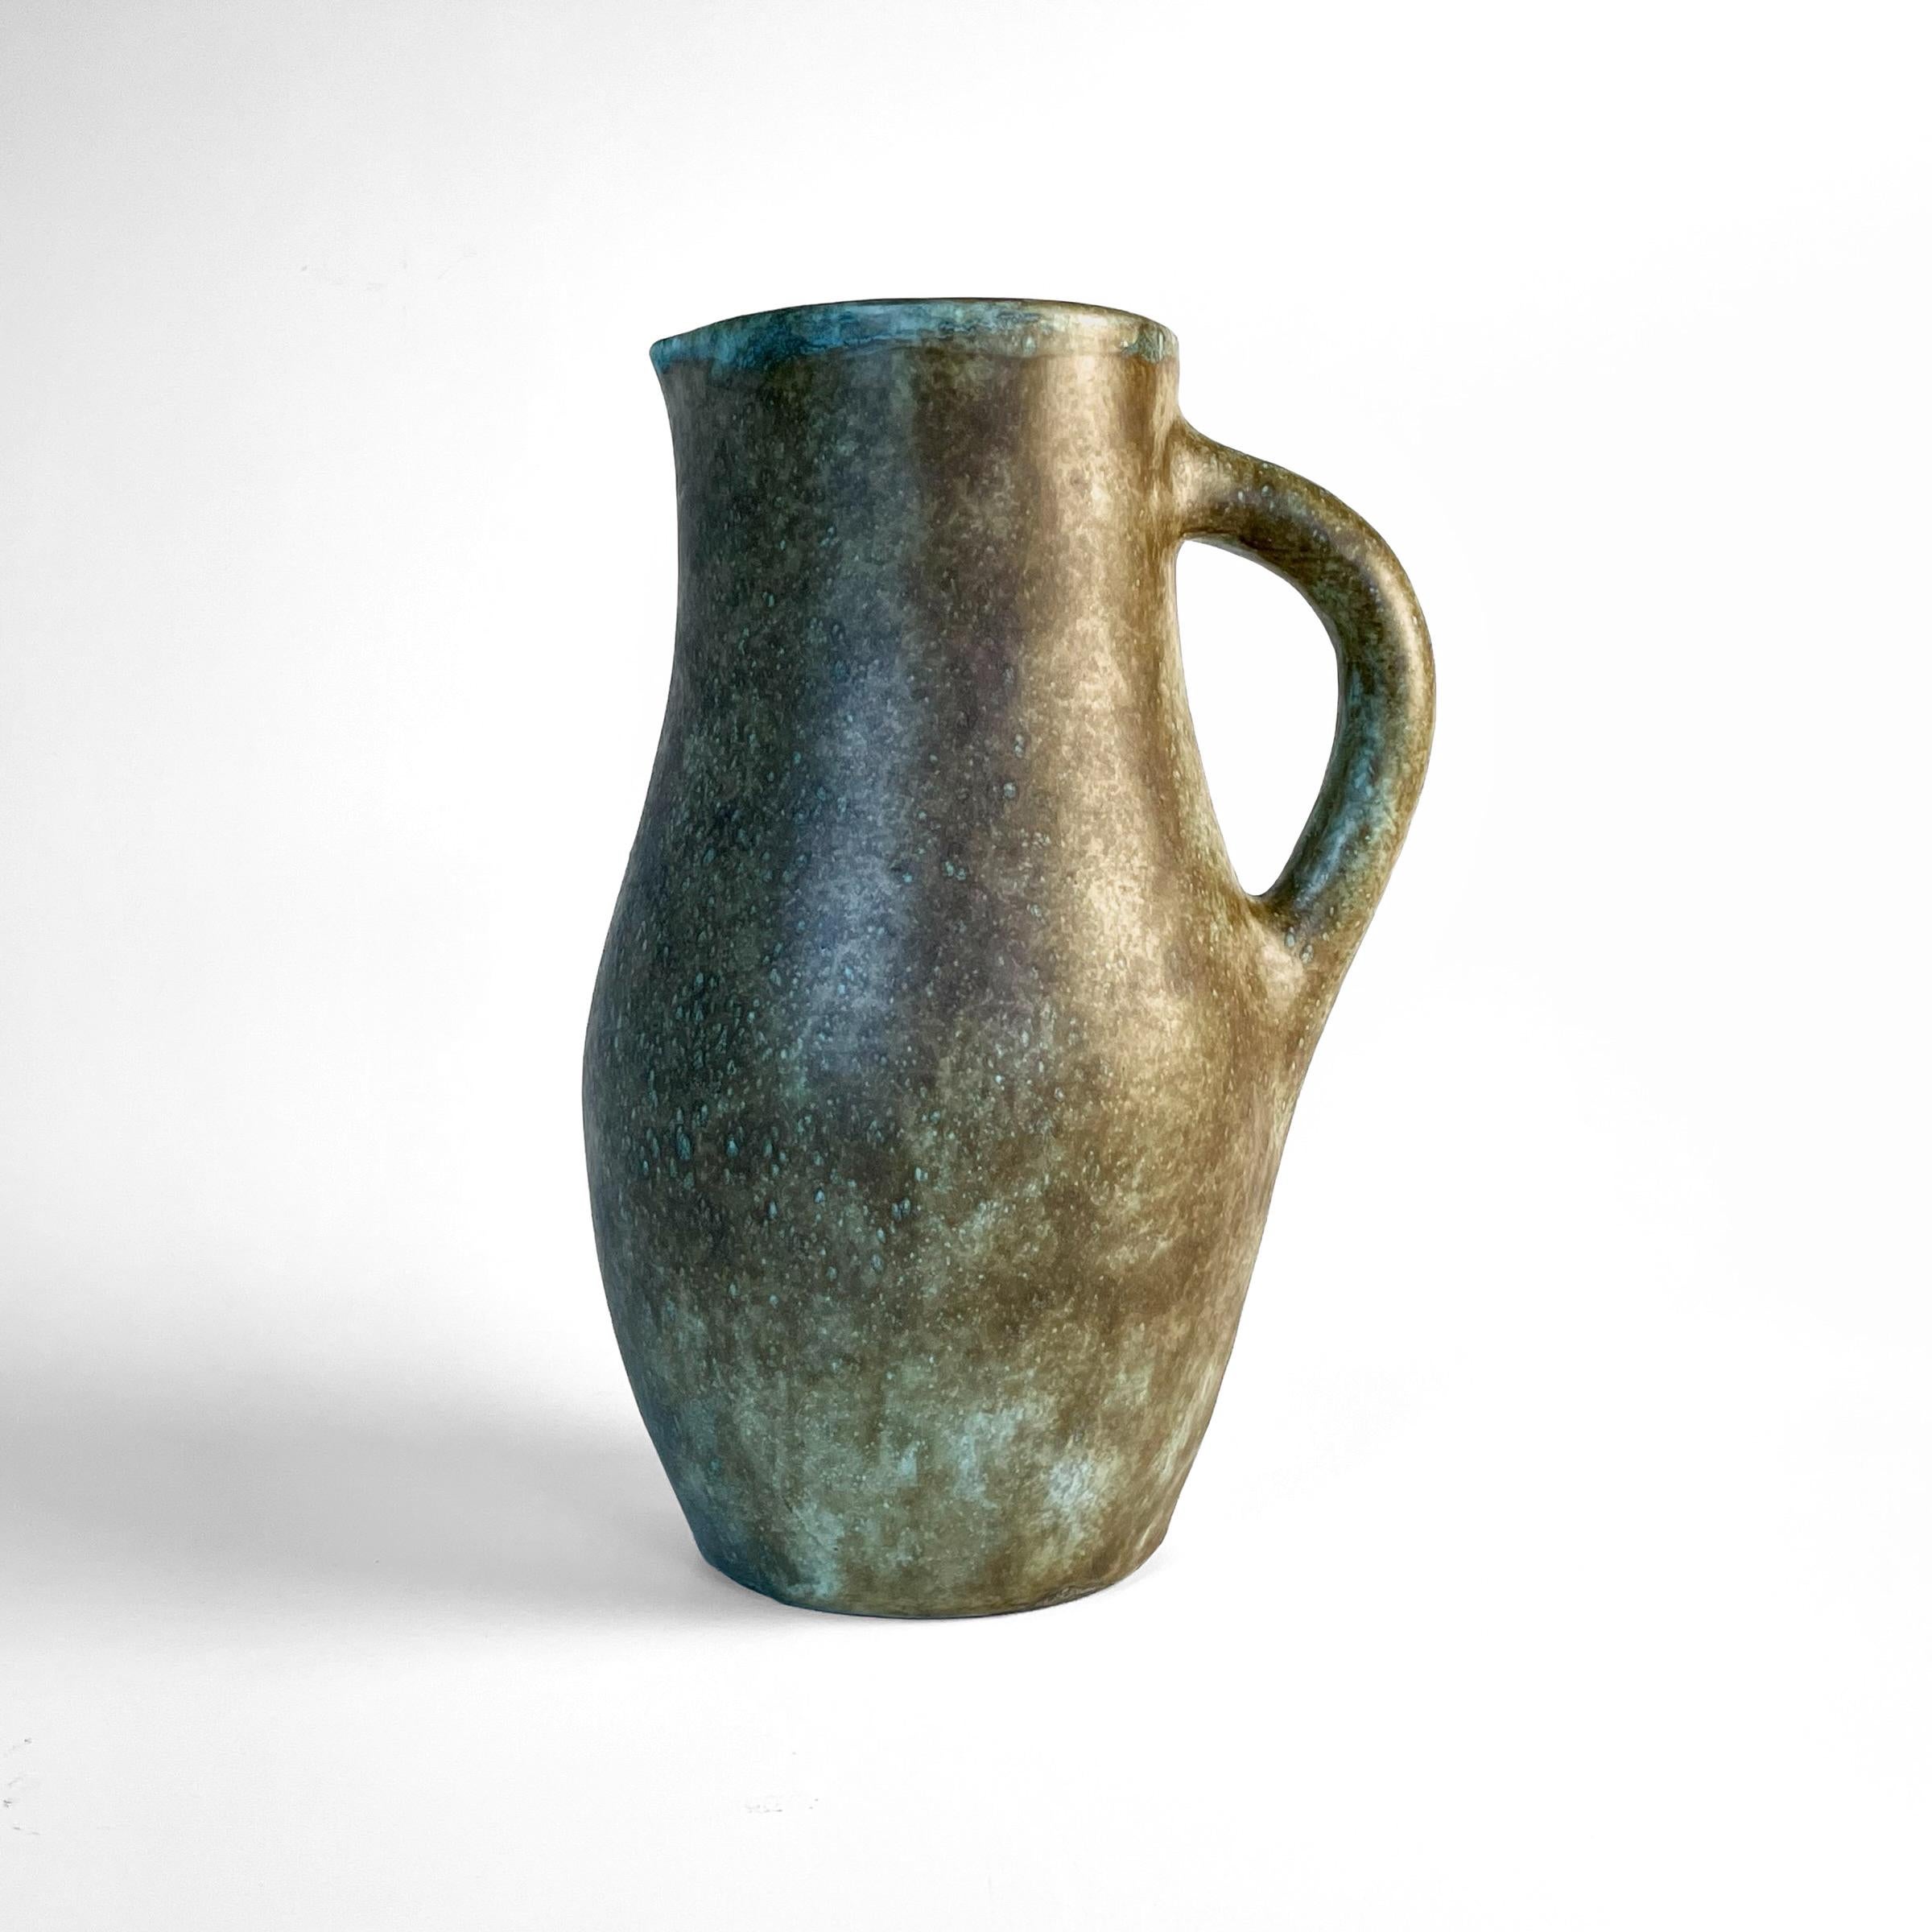 Glazed Ceramic pitcher by Jacques and Michelle Serre, Les 2 potiers, circa 1950